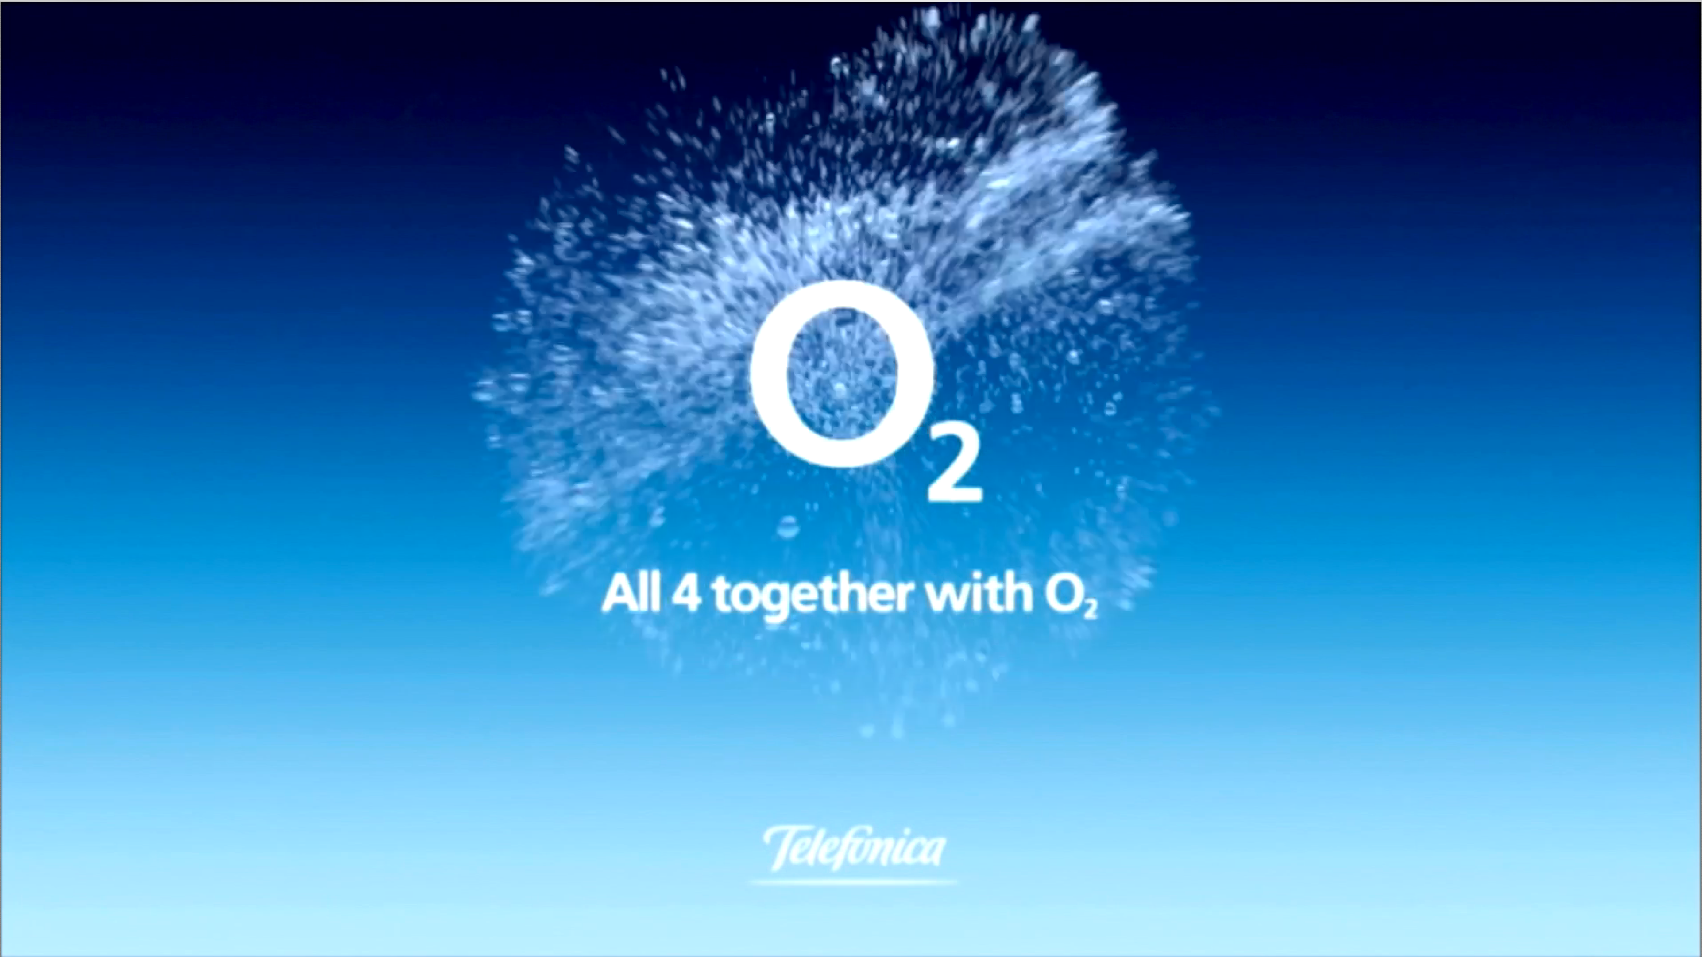 O2 and All 4 ident used to promote partnership